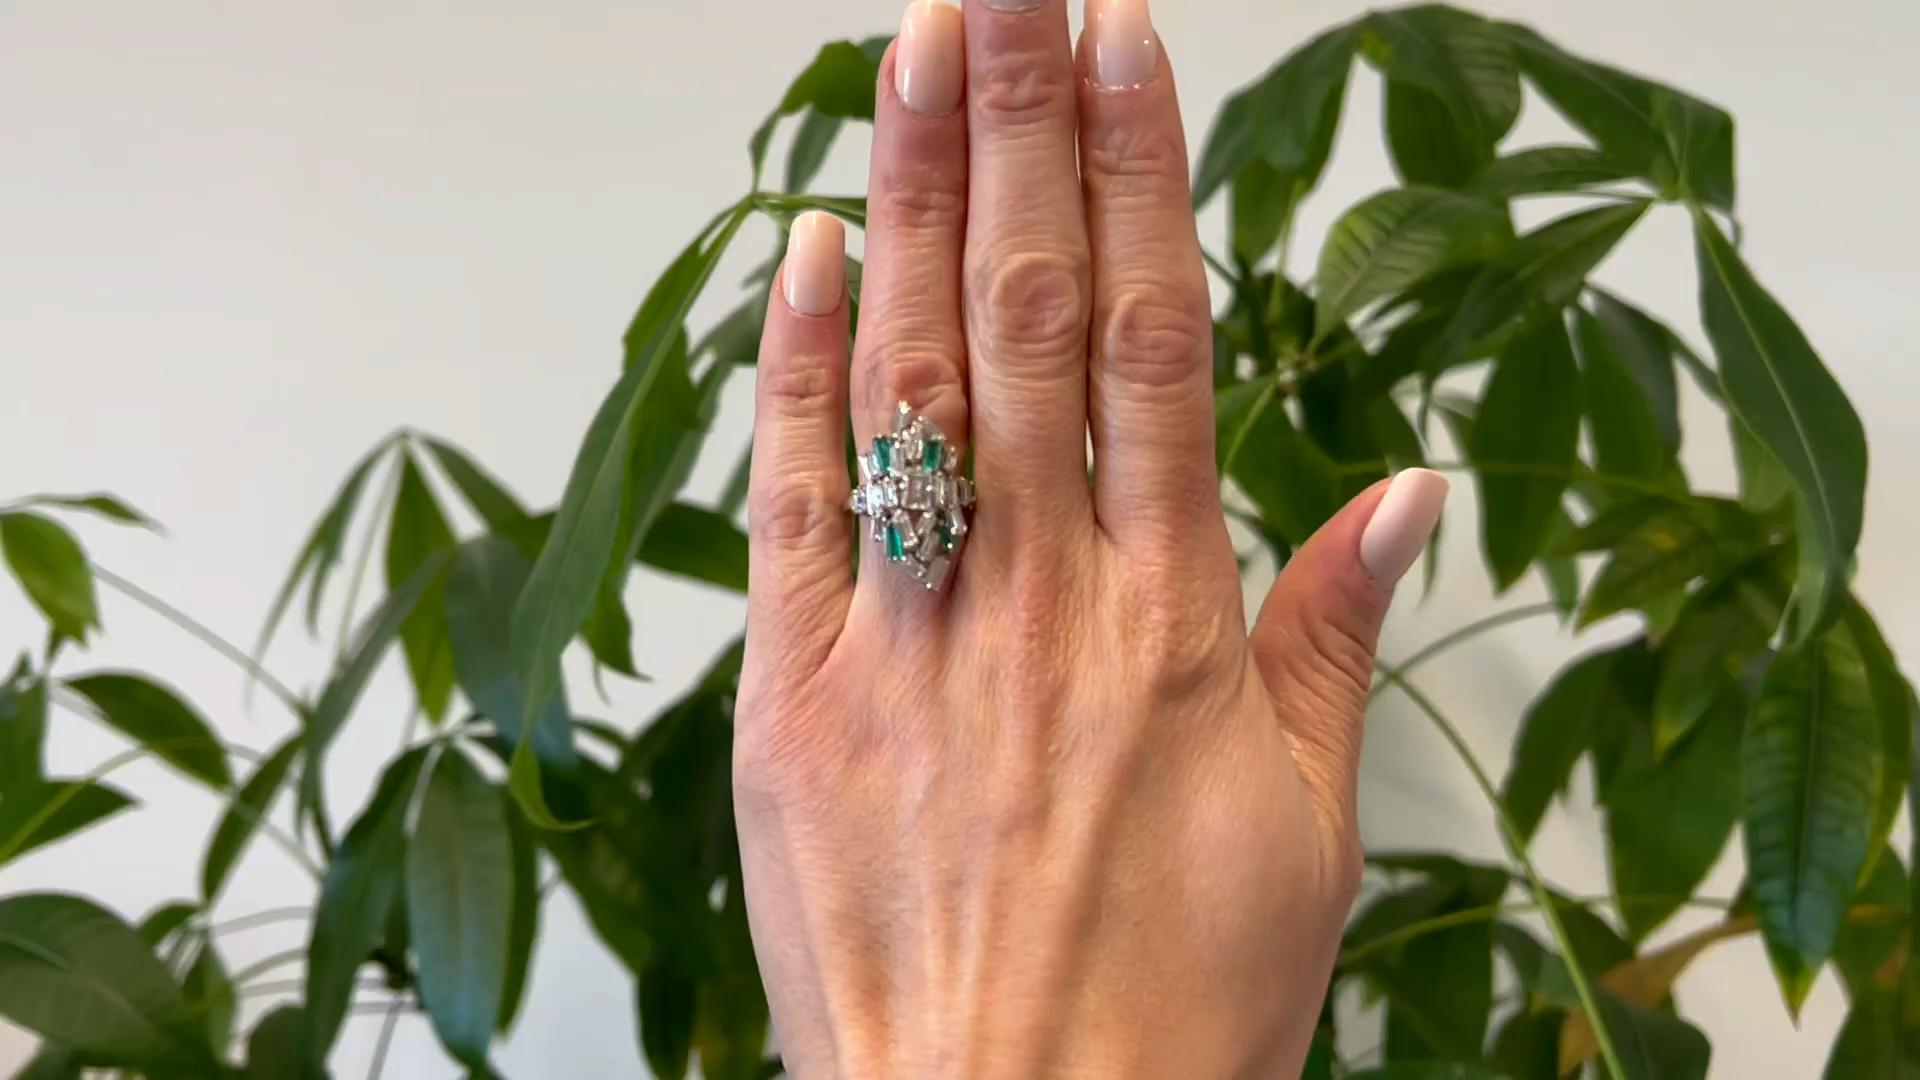 One Mid Century Diamond and Emerald Platinum Cocktail Ring. Featuring one emerald cut diamond weighing approximately 0.45 carat, graded F color, VS2 clarity. Accented by four step cut emeralds with a total weight of approximately 0.50 carat, and 21